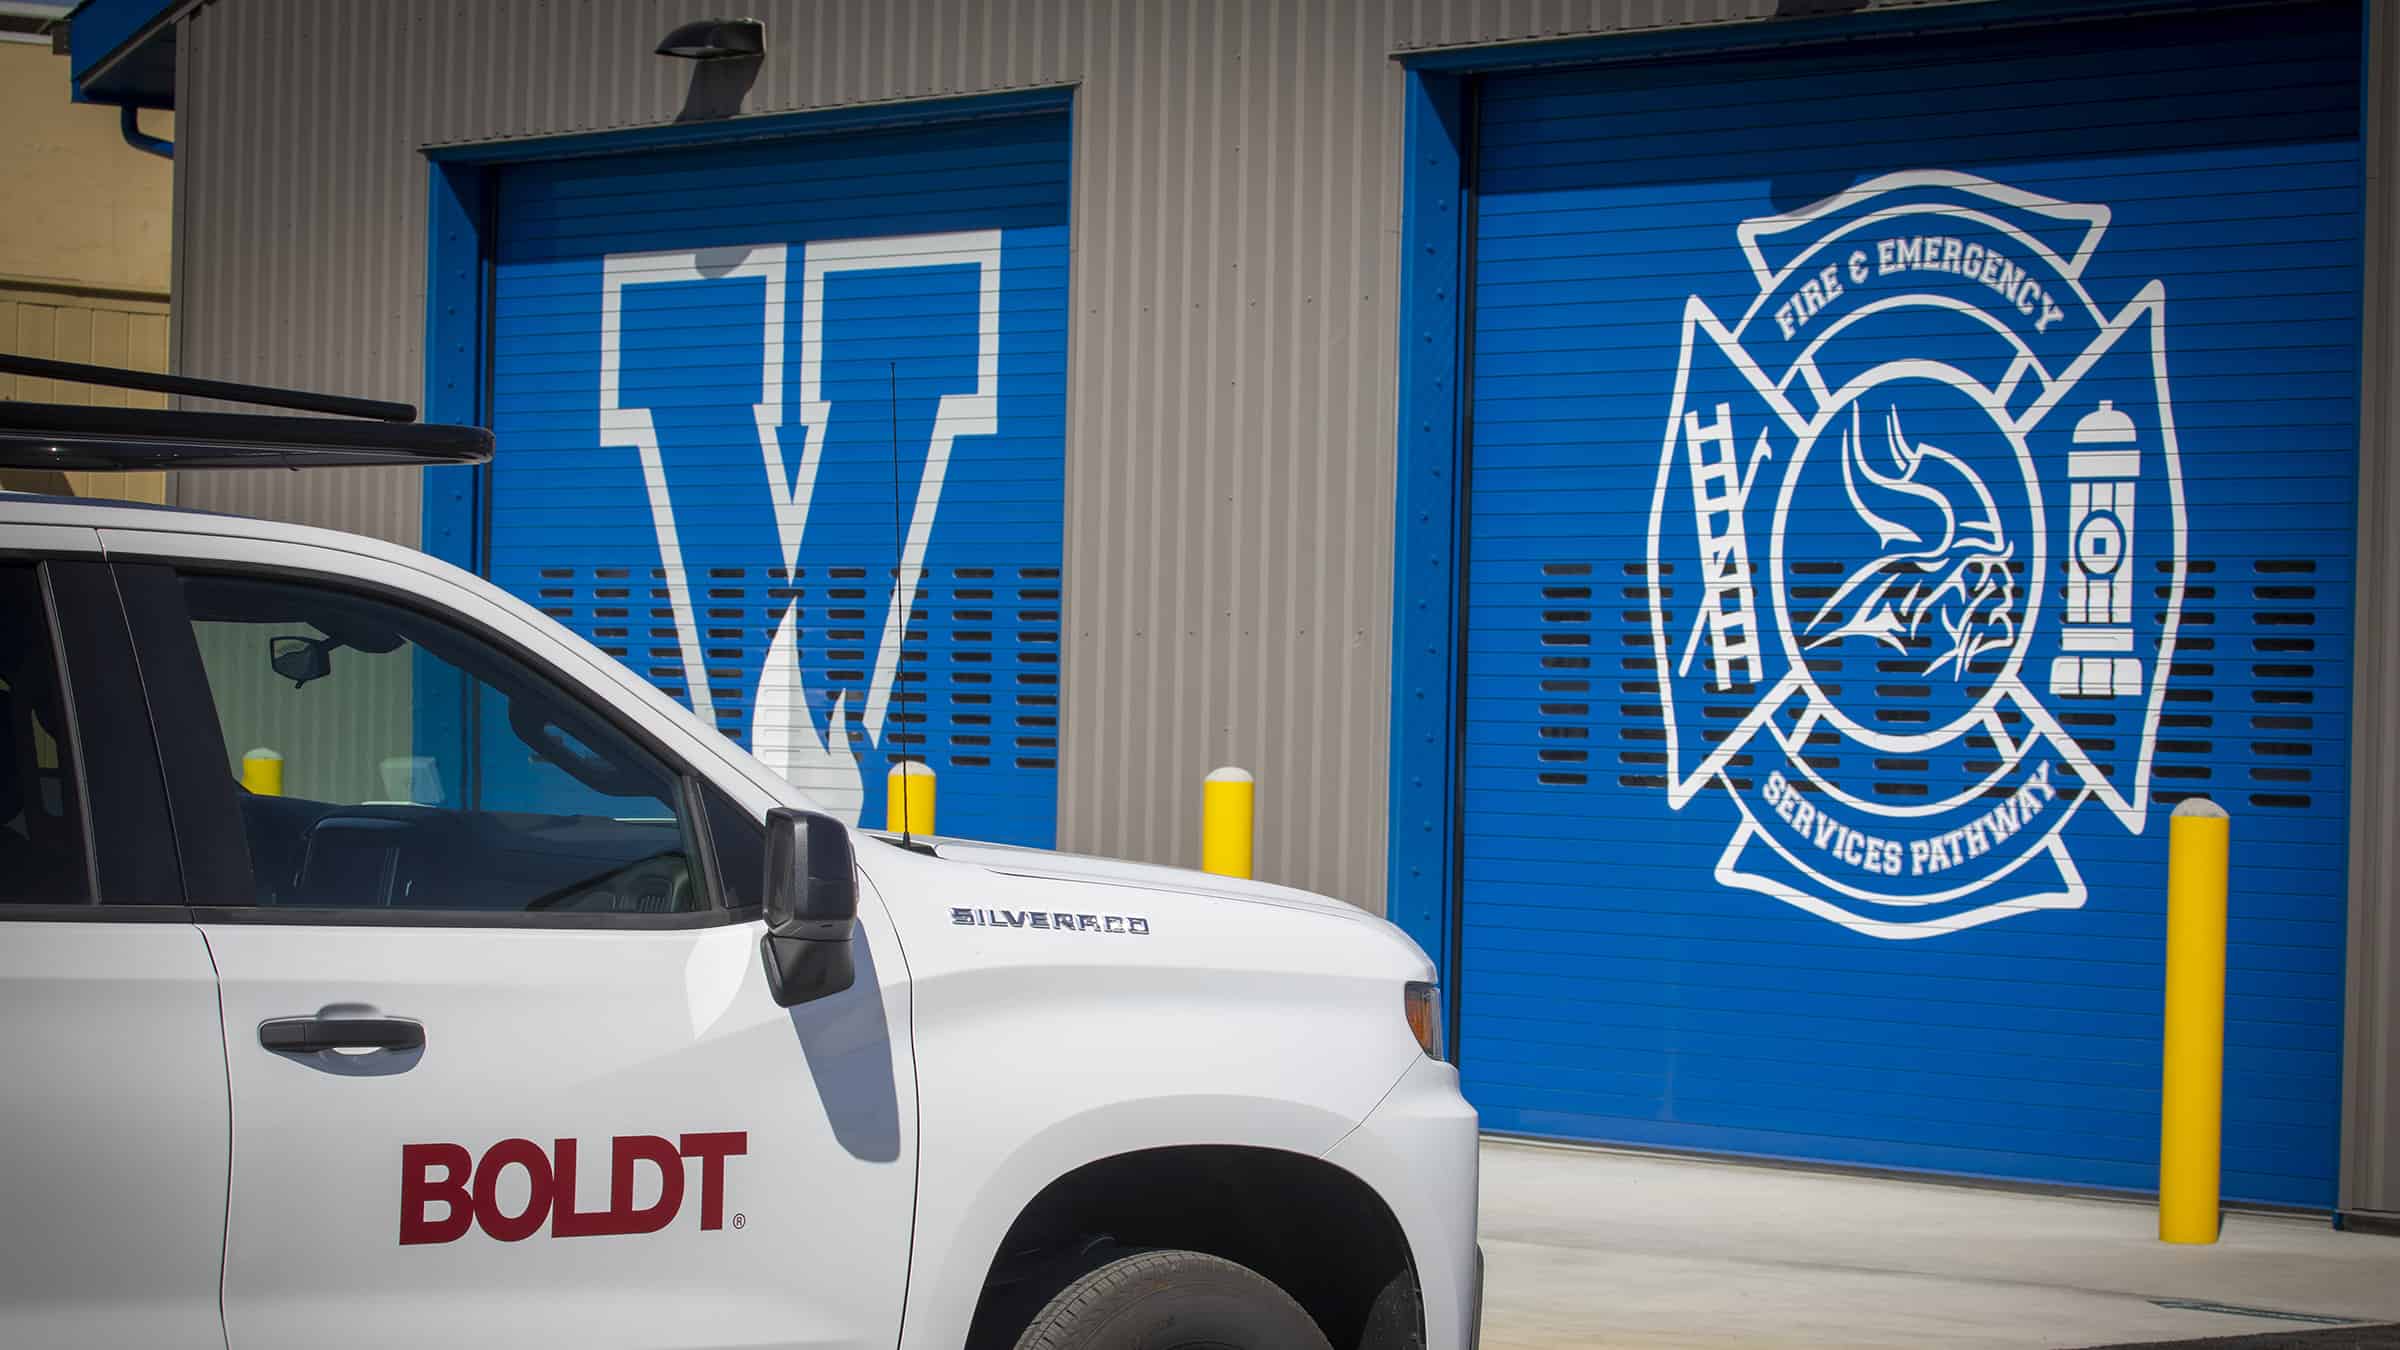 Elk Grove Unified School District Valley High School Fire Academy Overhead Doors with Boldt Truck Parked Outside